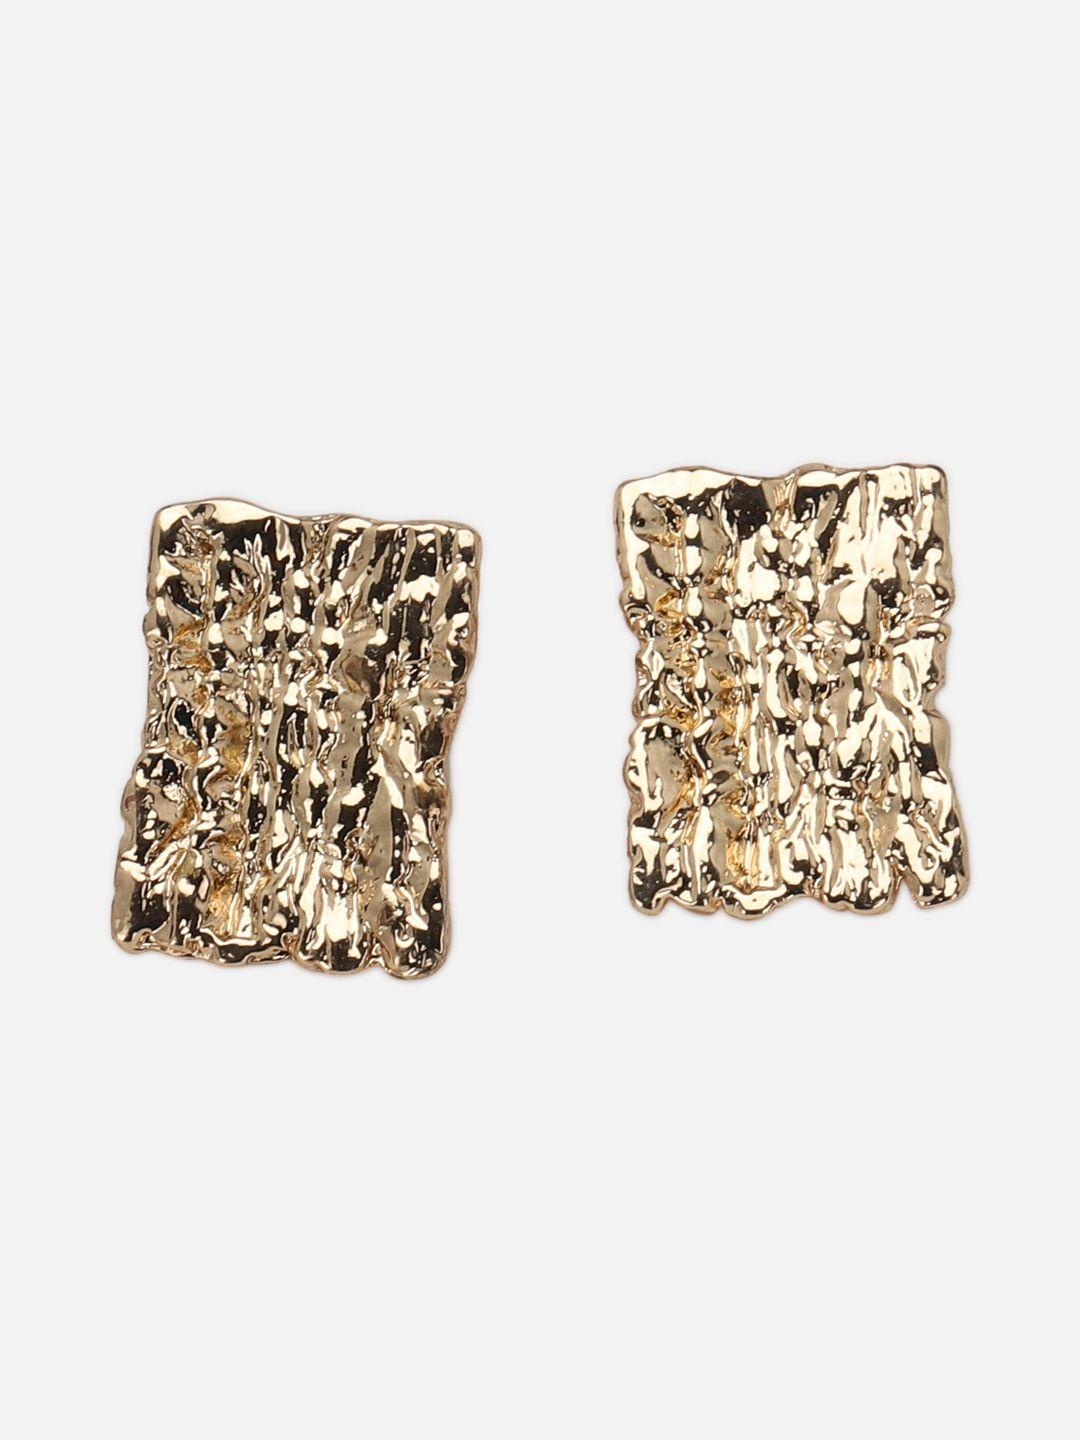 forever 21 contemporary studs earrings